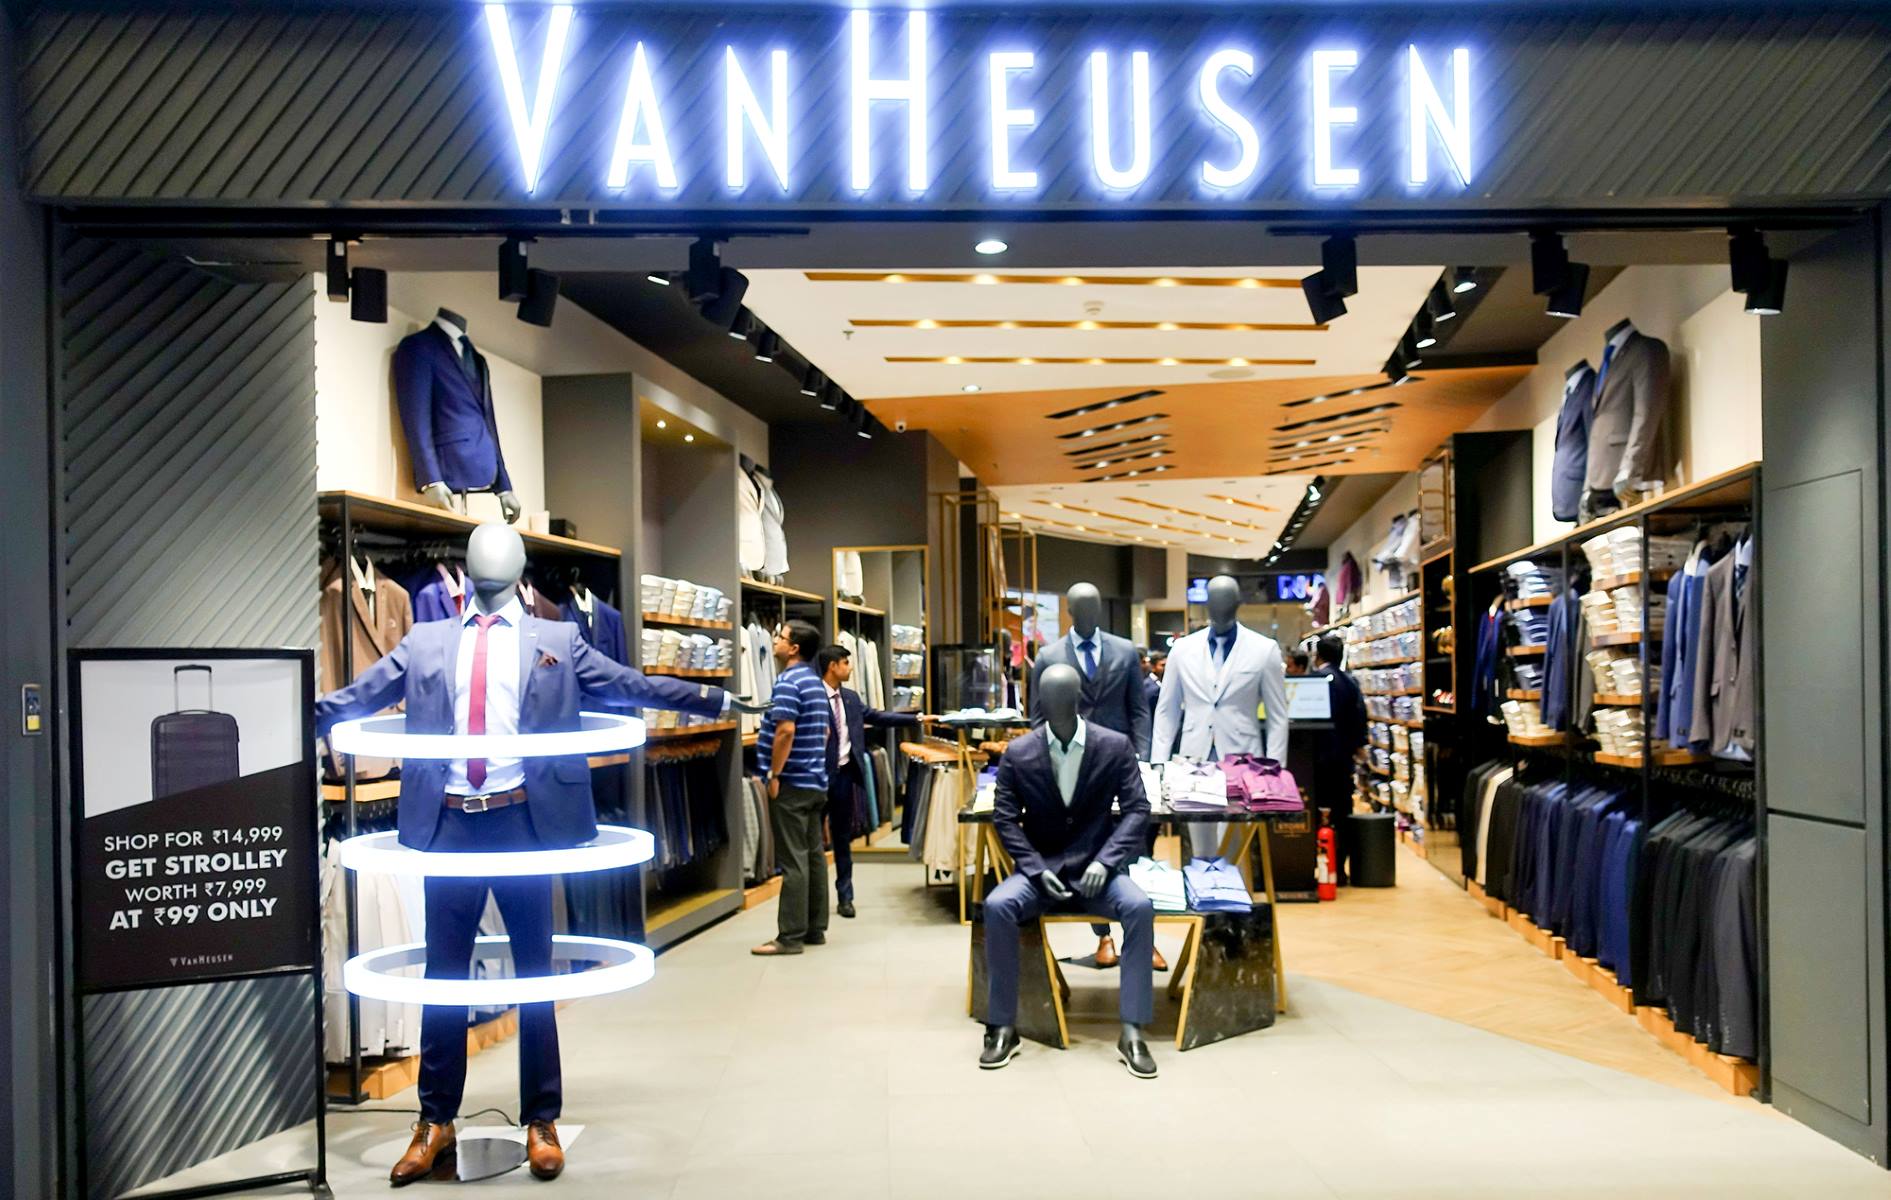 10 Mind-Blowing Facts You Never Knew About Van Heusen!